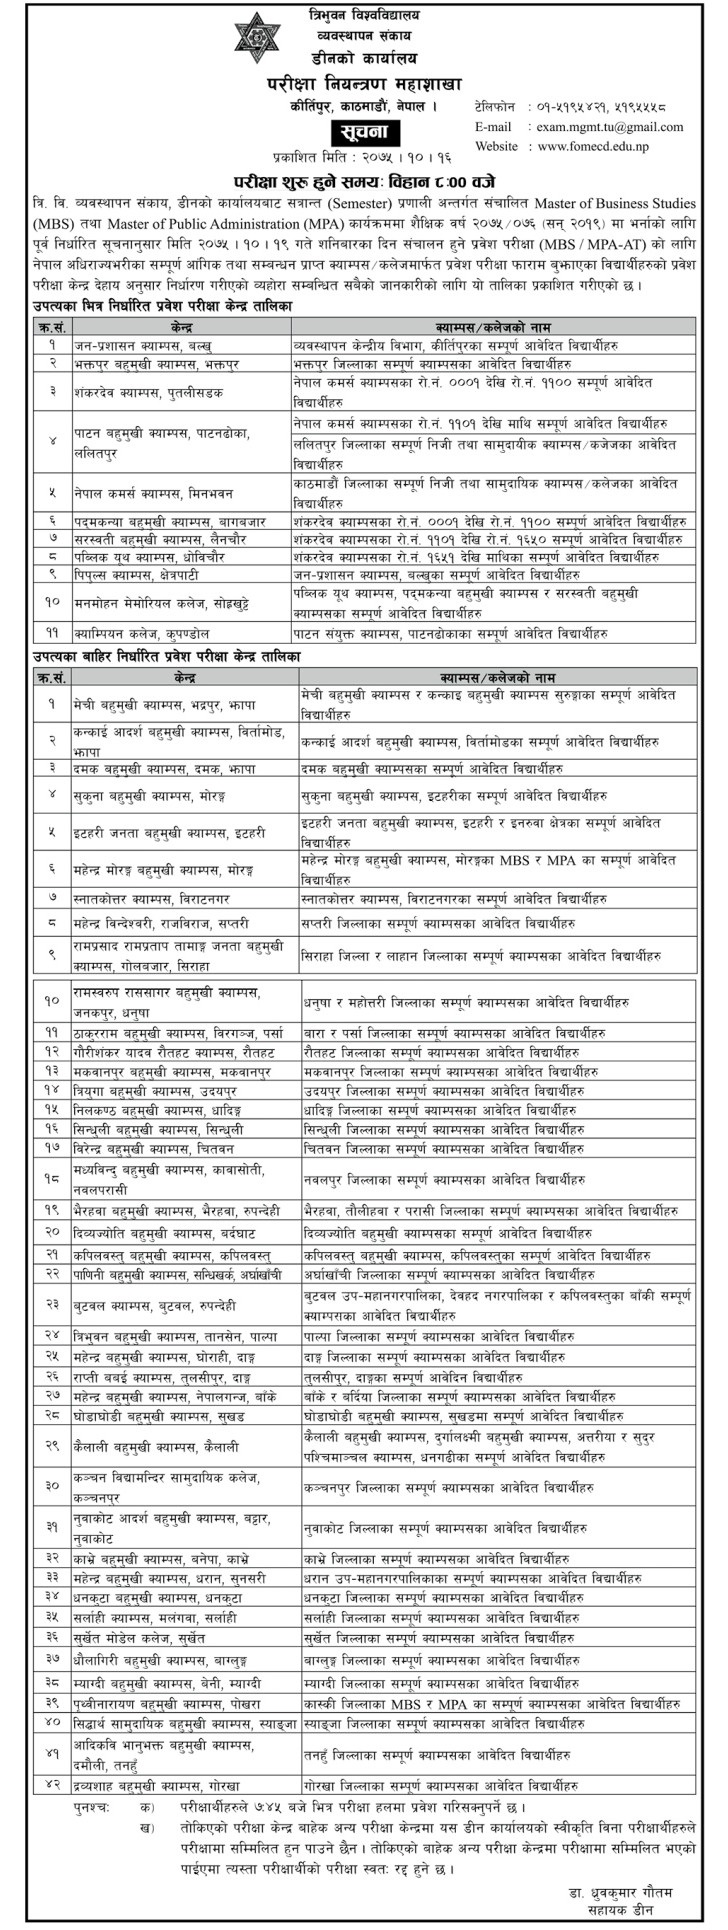 Entrance Exam Center of Semester Wise MBS and MPA - Tribhuvan University